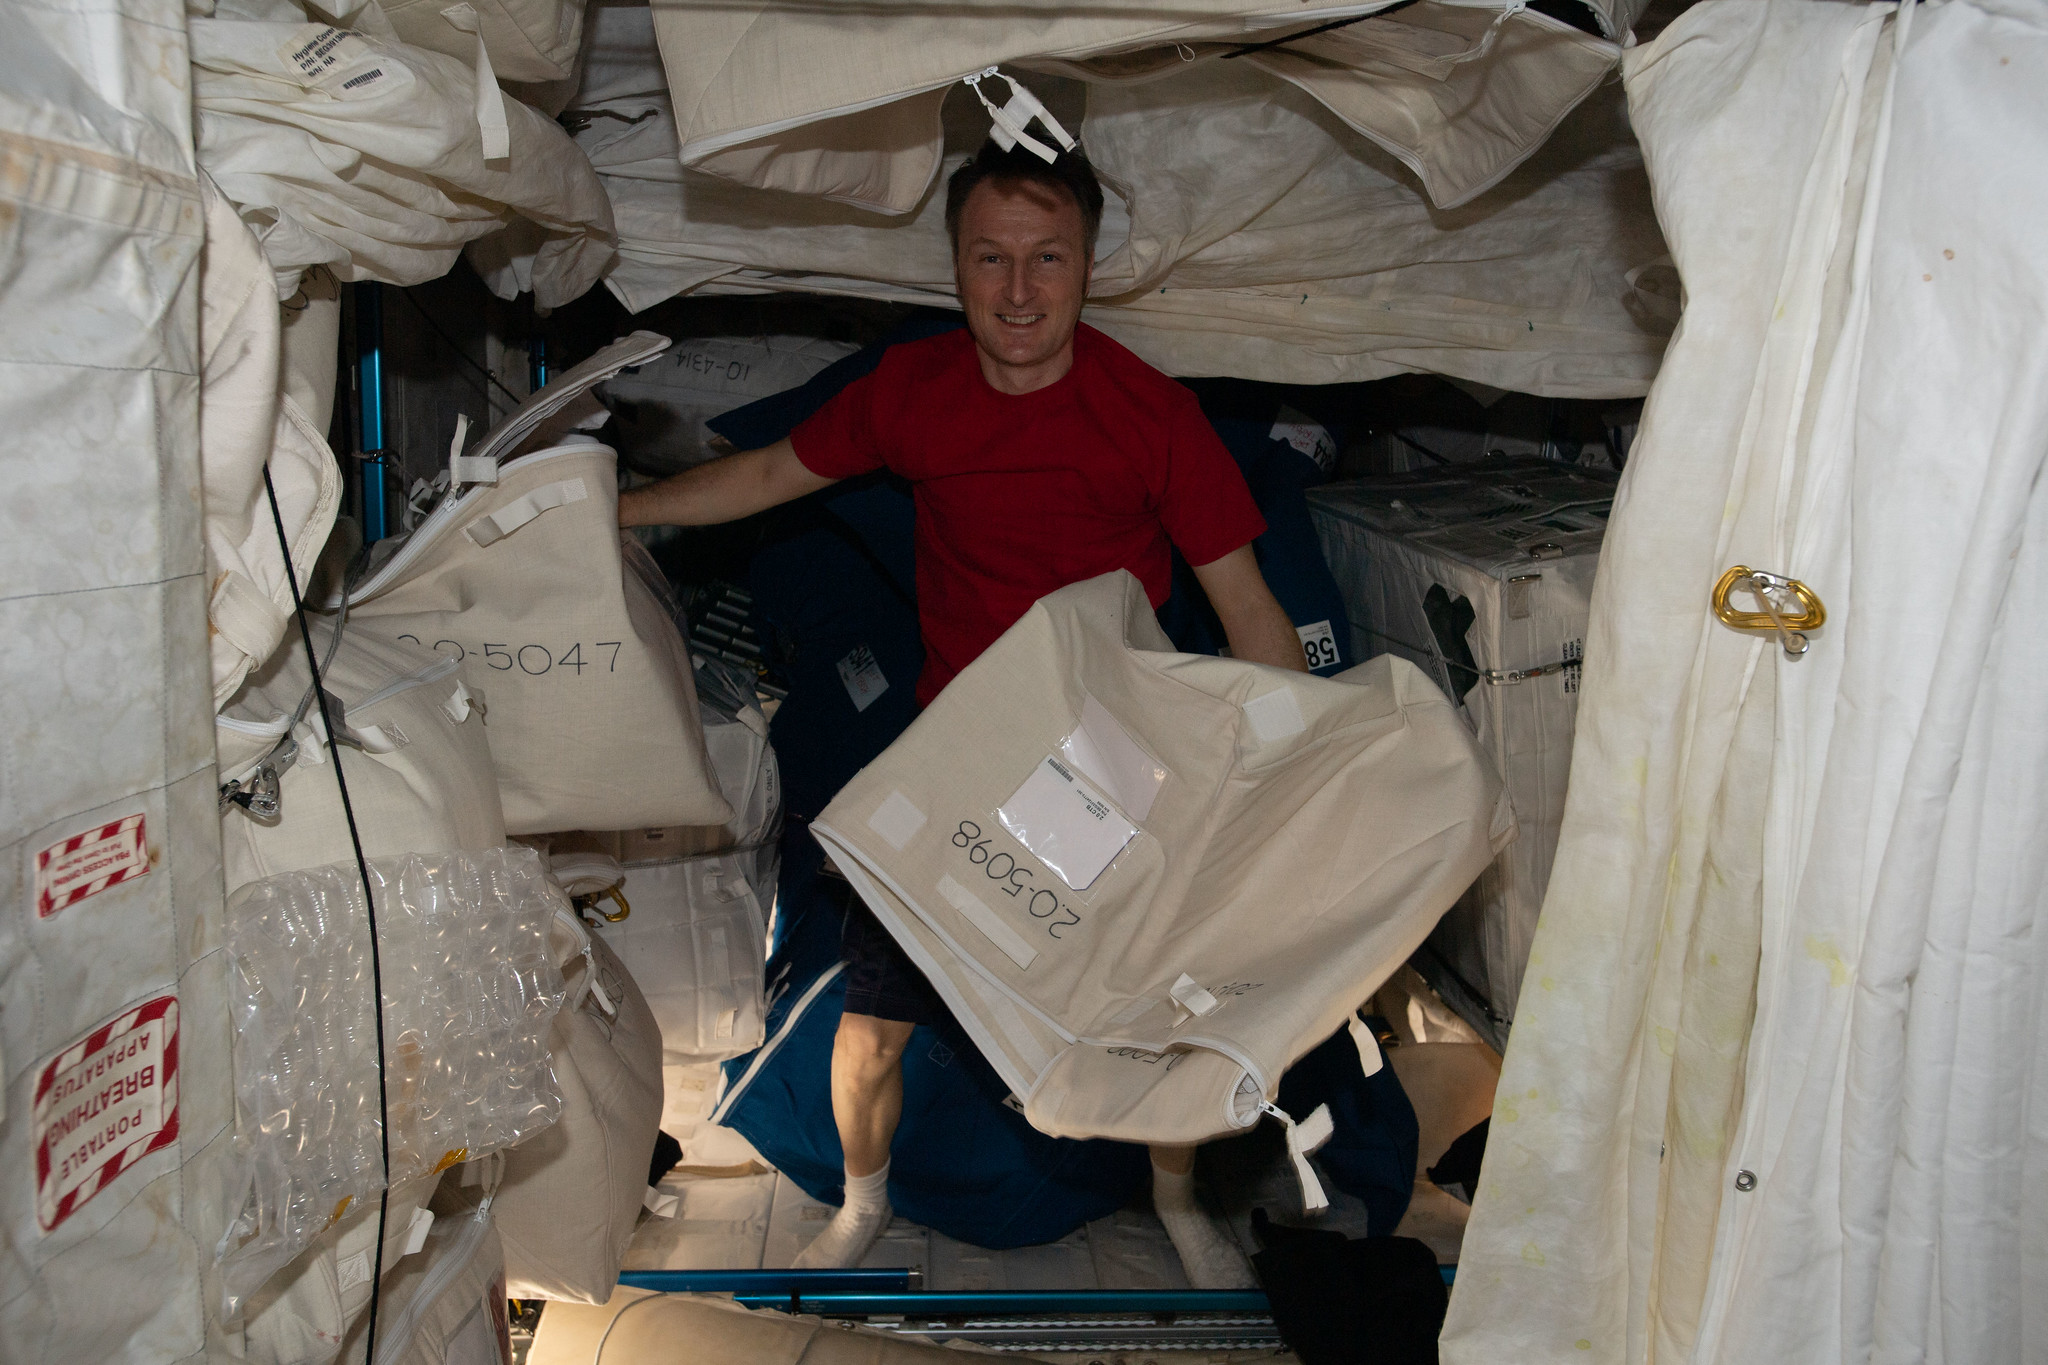 image of astronaut moving cargo bags